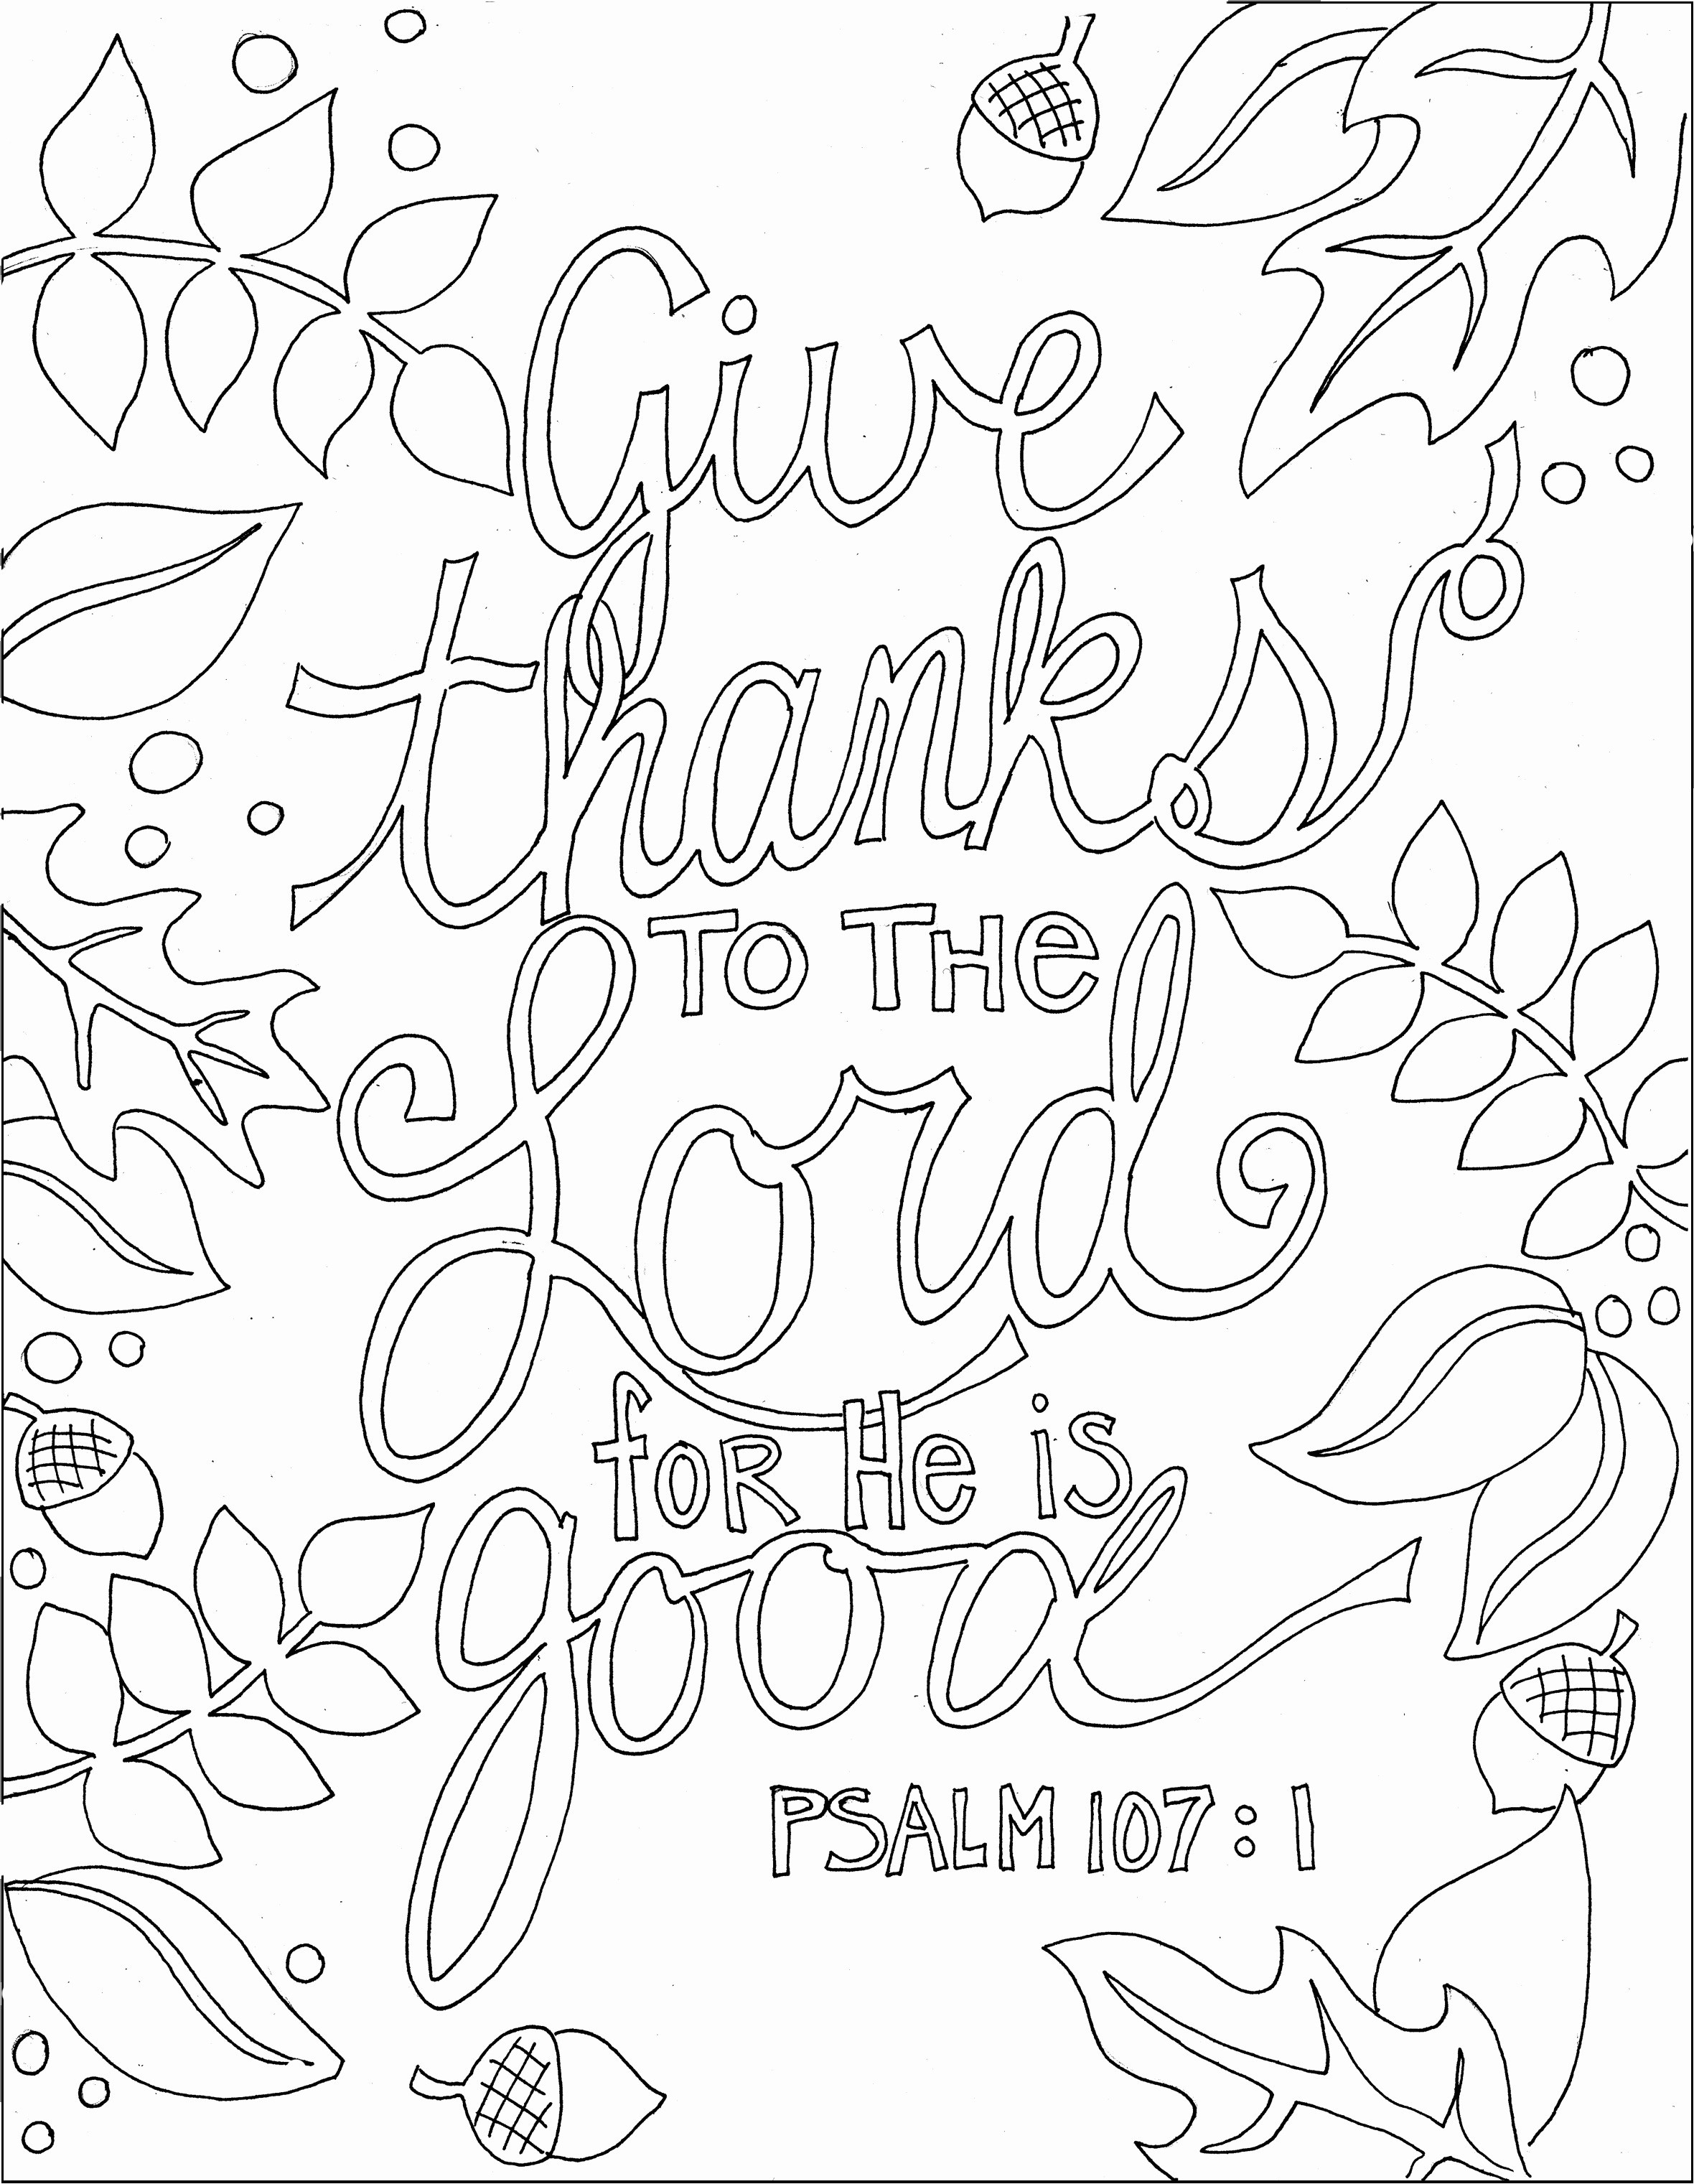 Coloring Pages : Free Printable Bible Coloring Pages With Scriptures - Free Printable Bible Coloring Pages